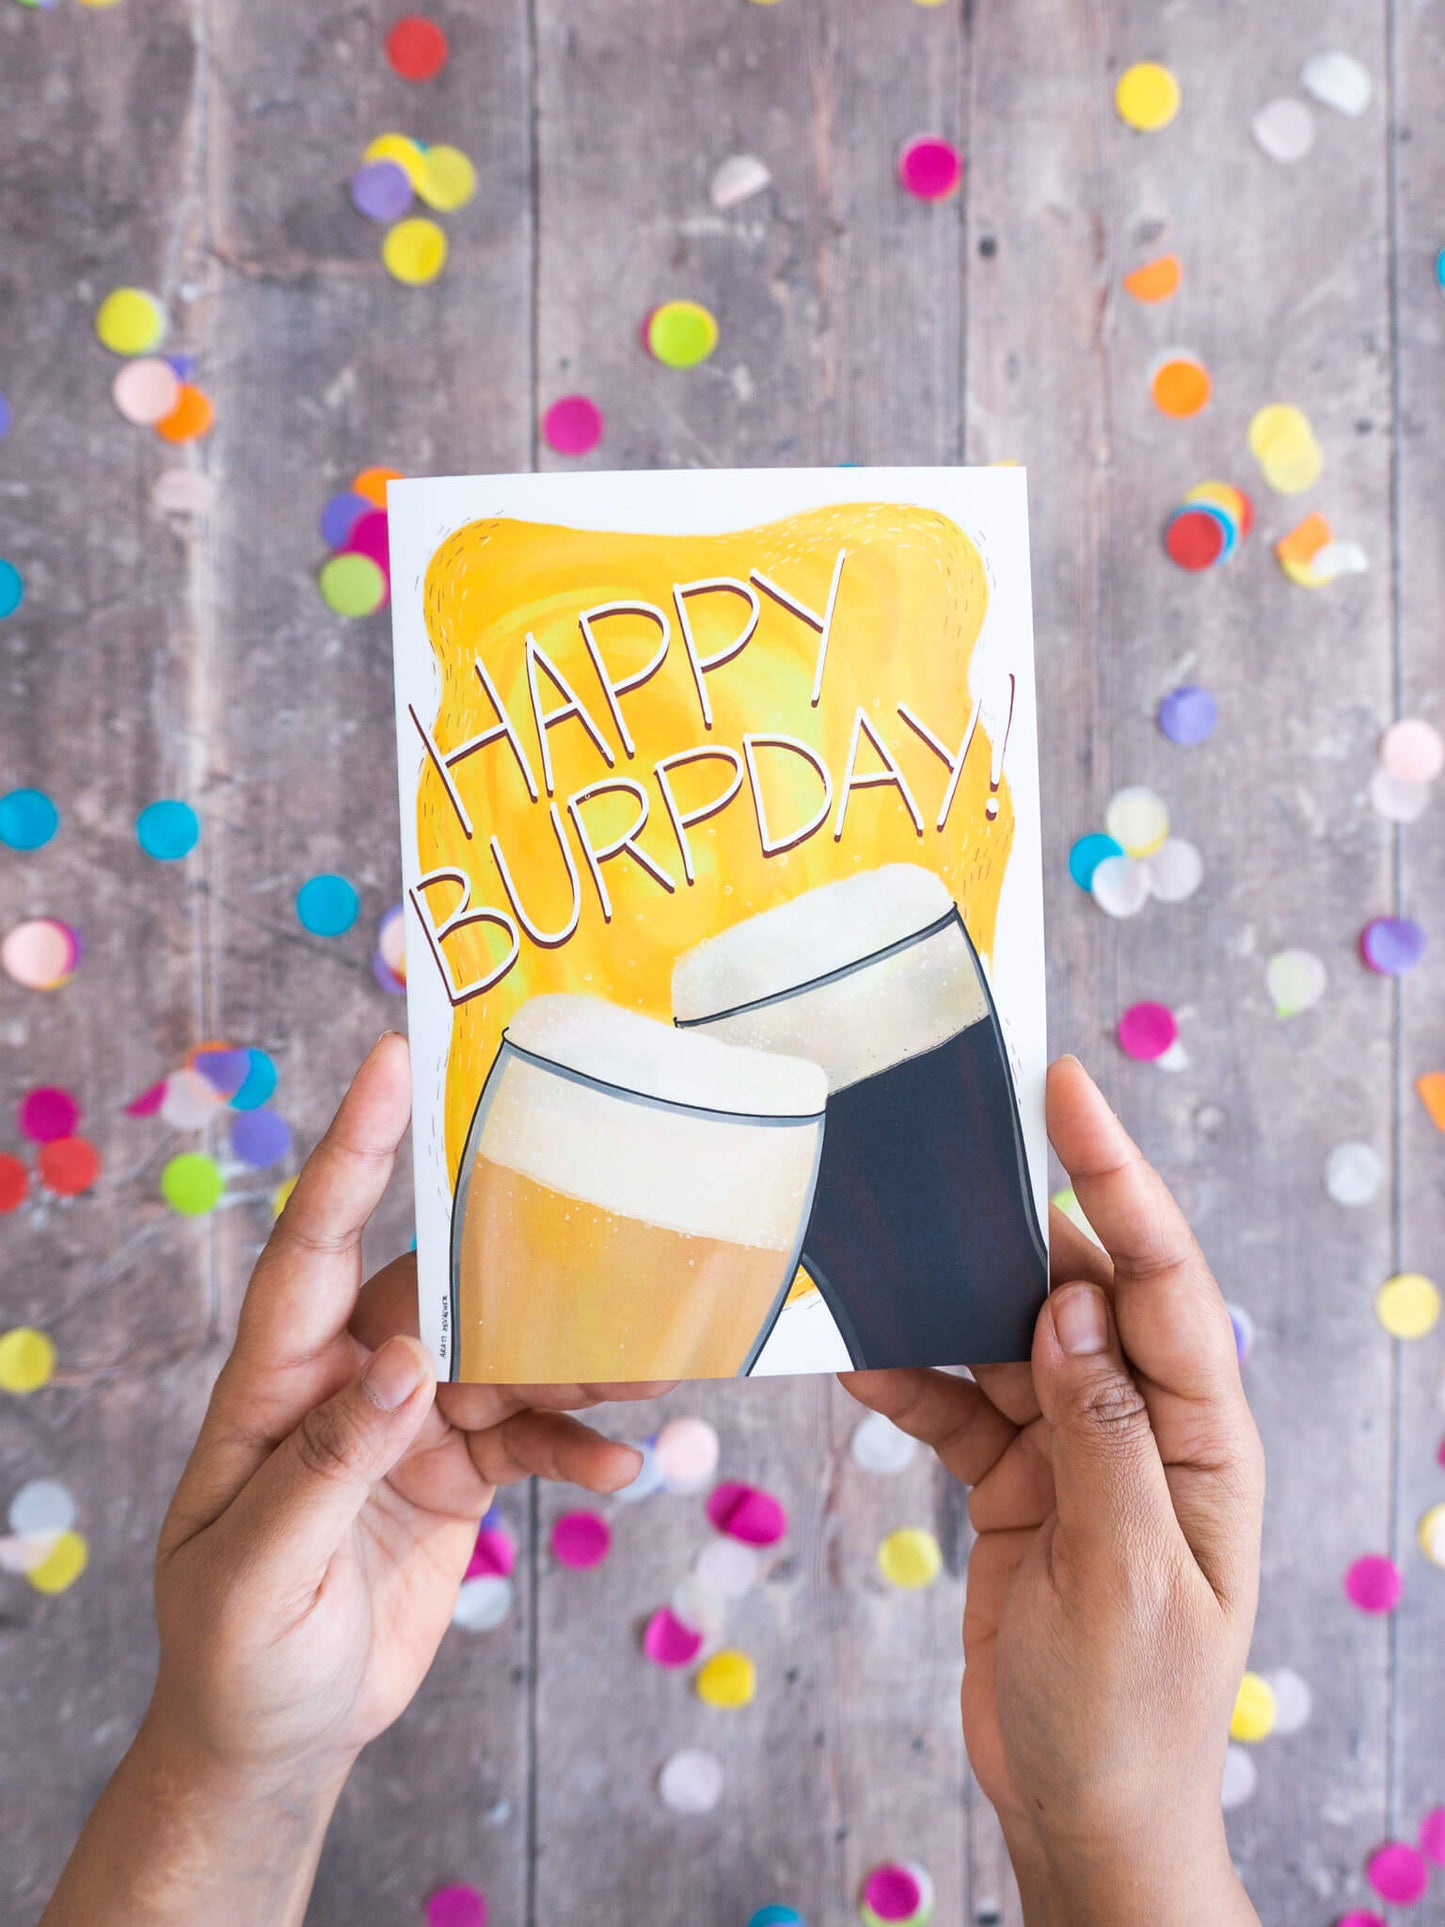 Happy Burpday Beer – (end of line) birthday greeting card